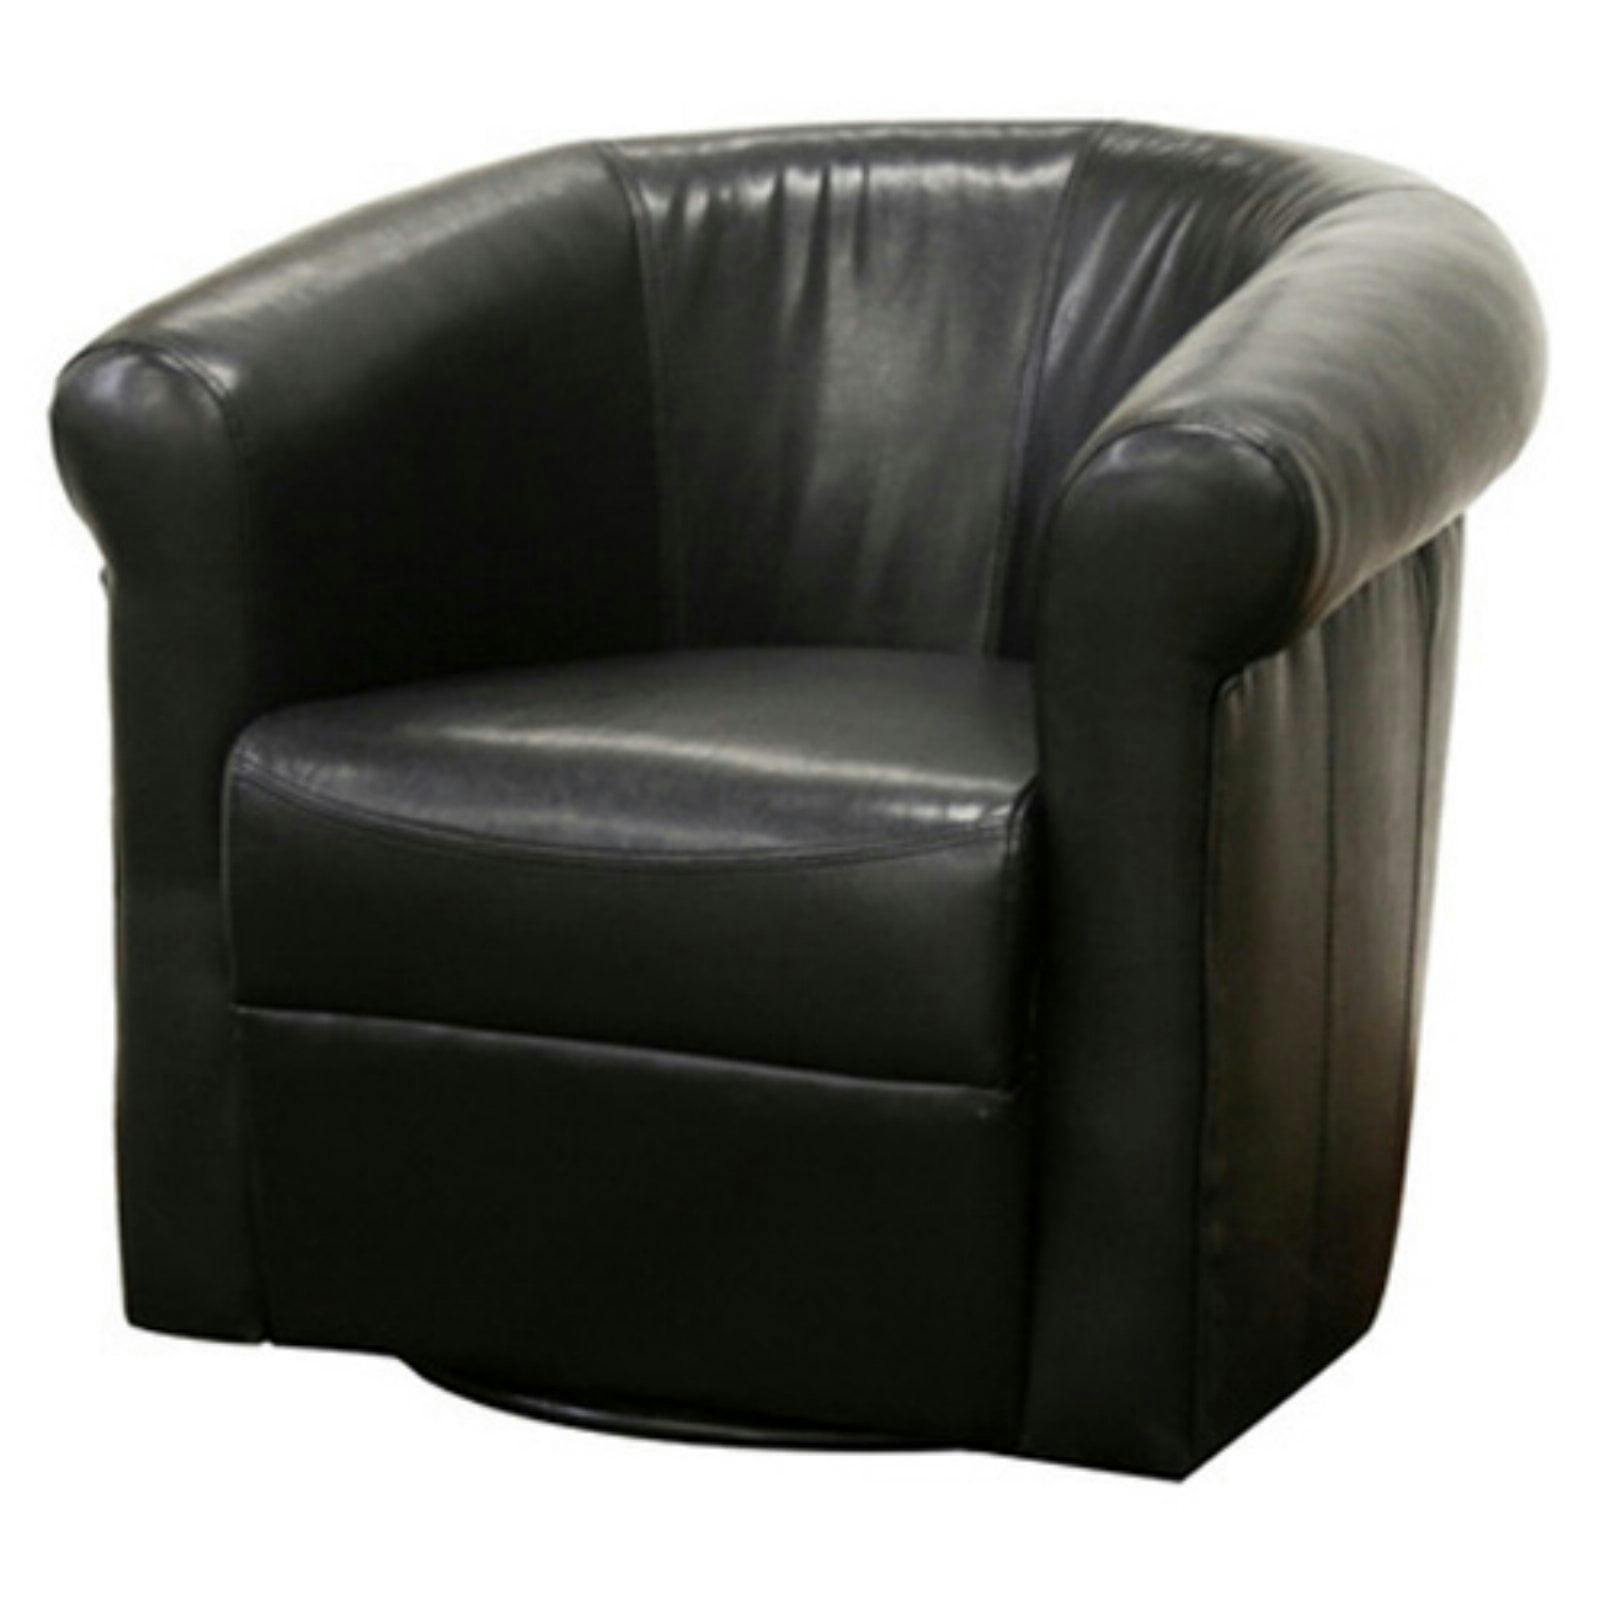 Swivel Barrel Accent Chair in Black Faux Leather with Wooden Frame